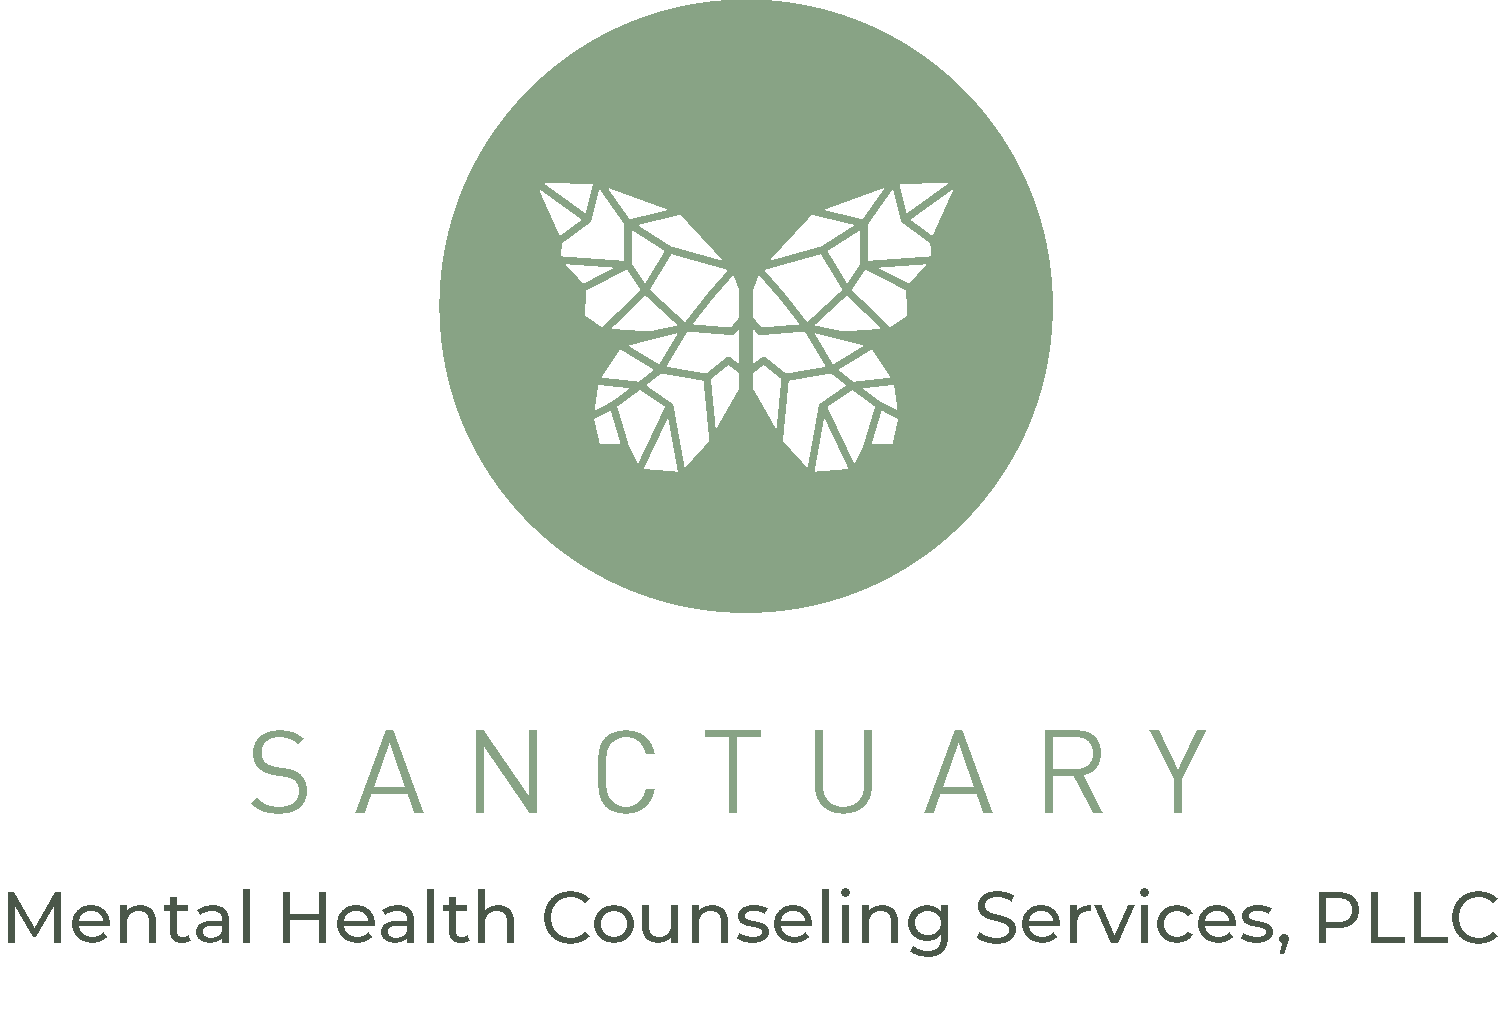 Mental Health Counseling Services, PLLC